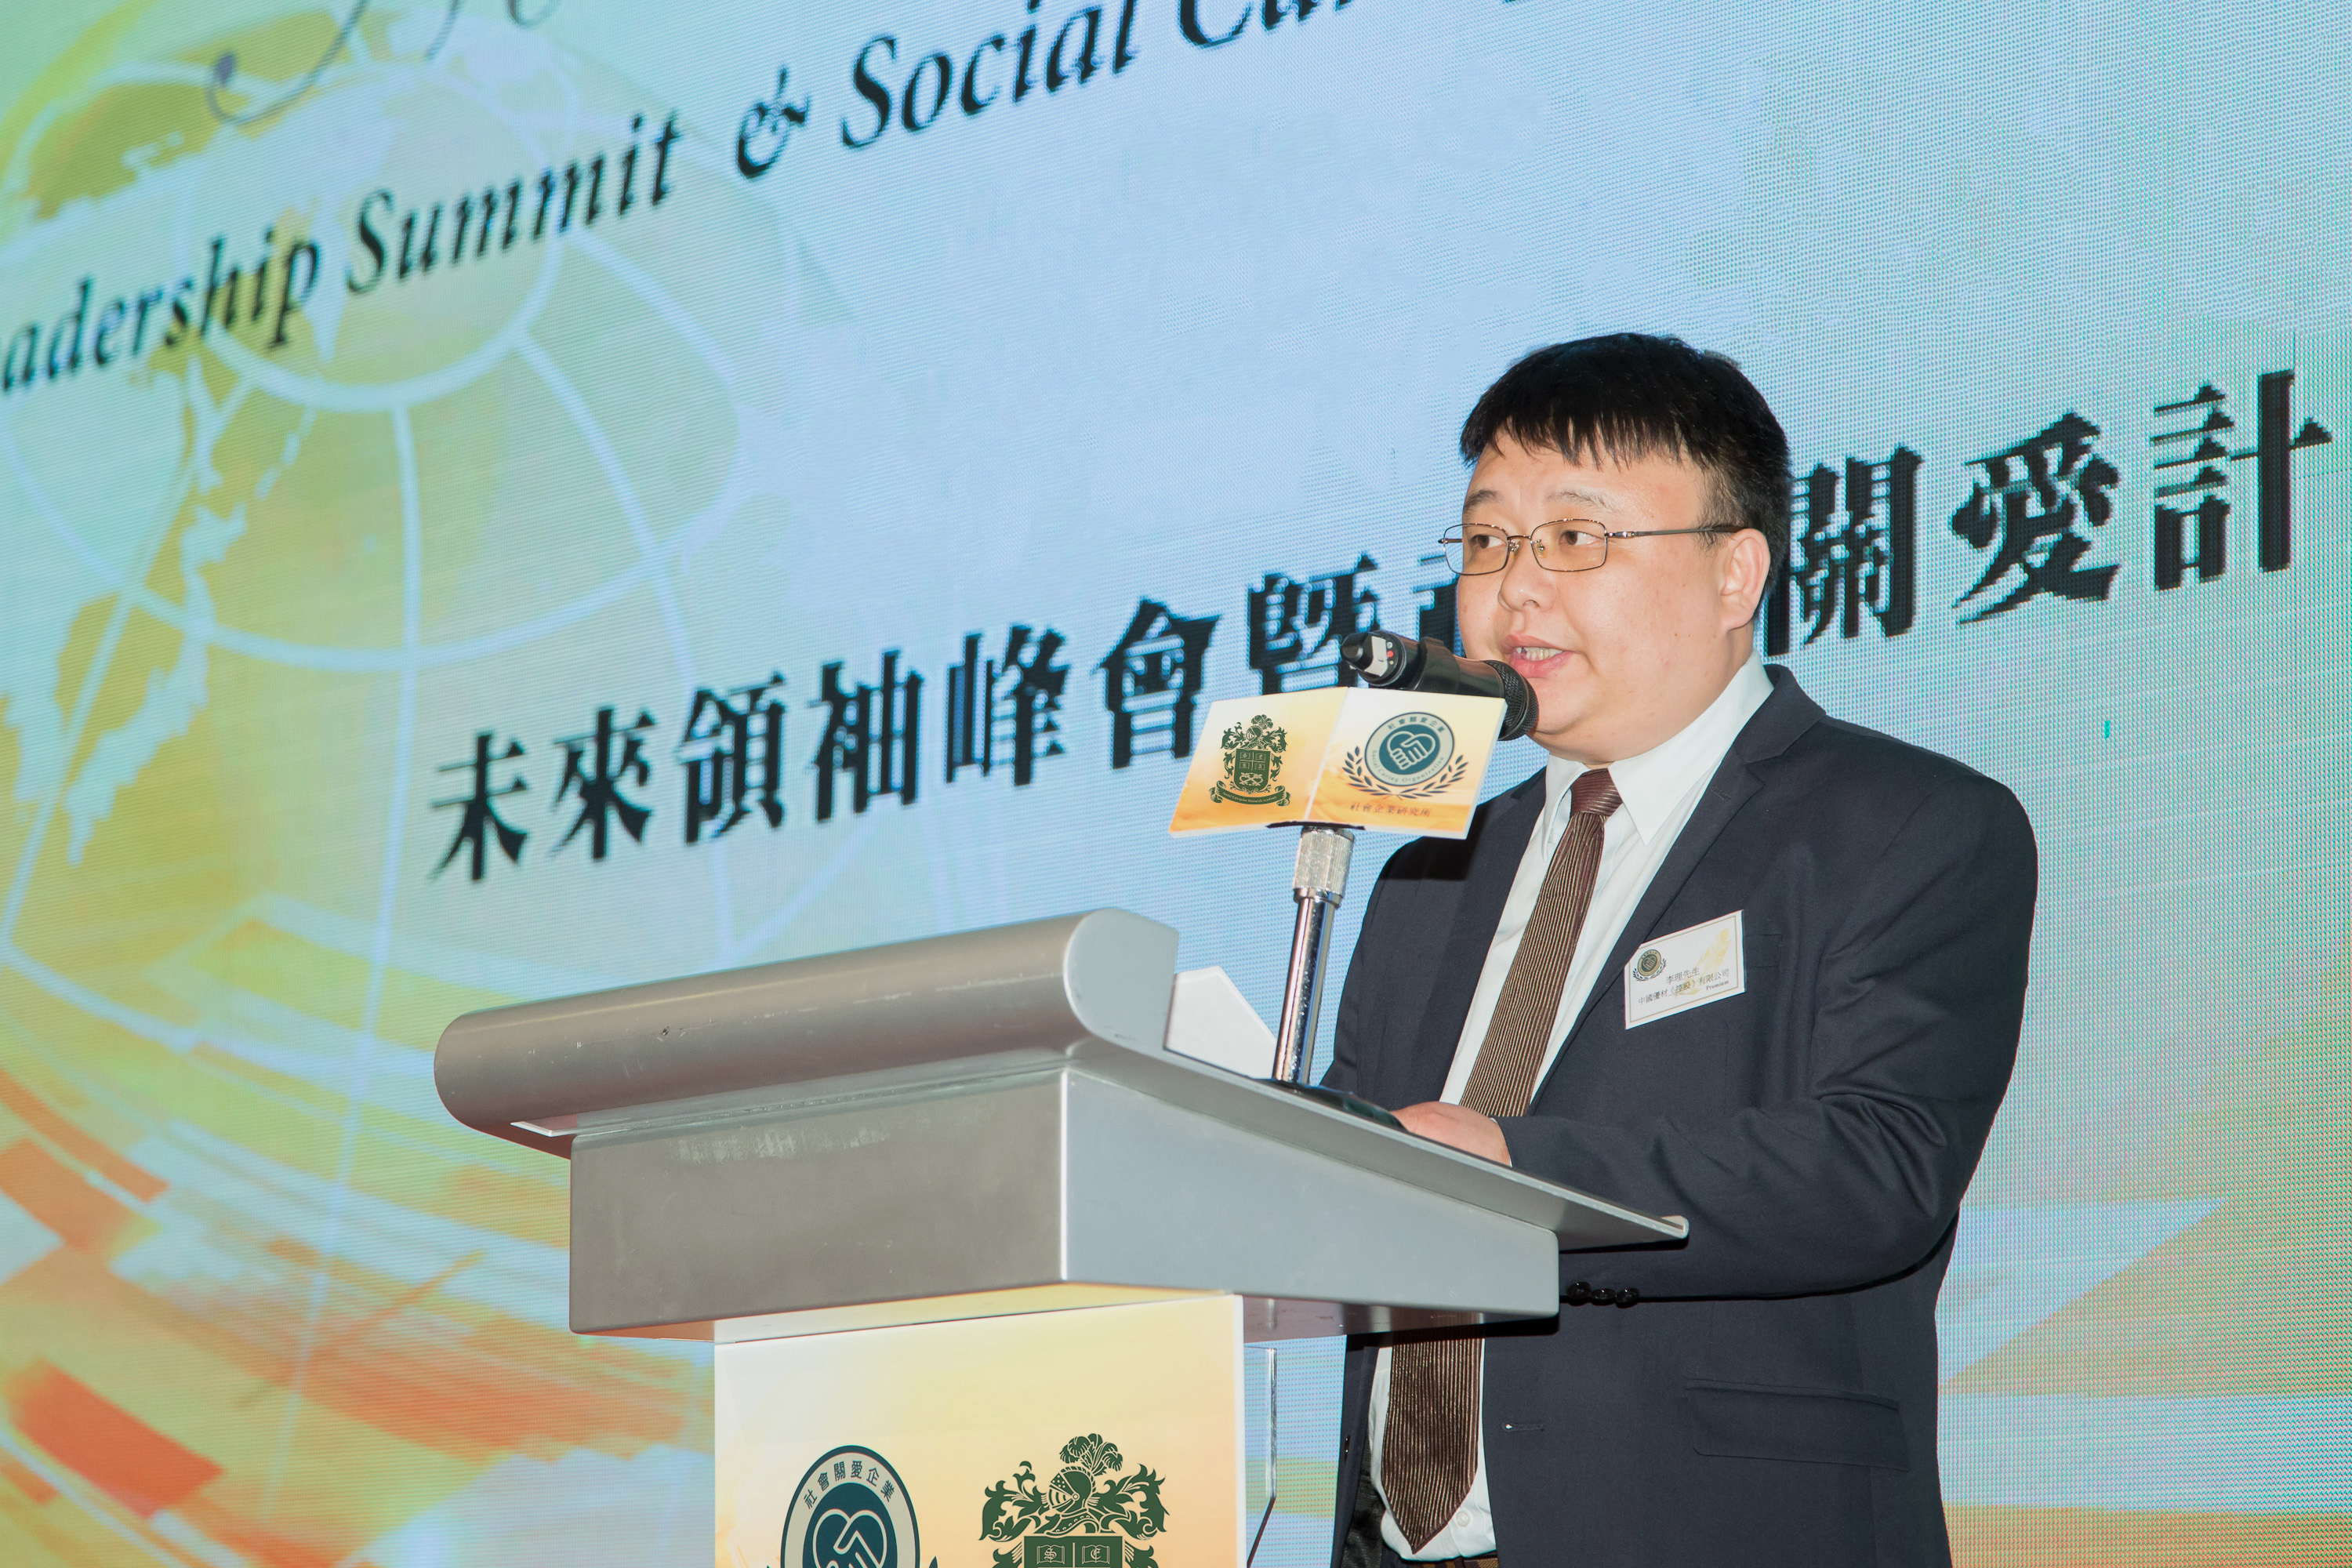 The CEO of China Wood Optimization (Holding) Limited, Mr. Li Li said, ‘Social responsibility is the basis for an enterprise to grow sustainably; protecting the environment is the basic social responsibility of every organization, our company has already integrated environmental protection policies and practises into all production stages.’